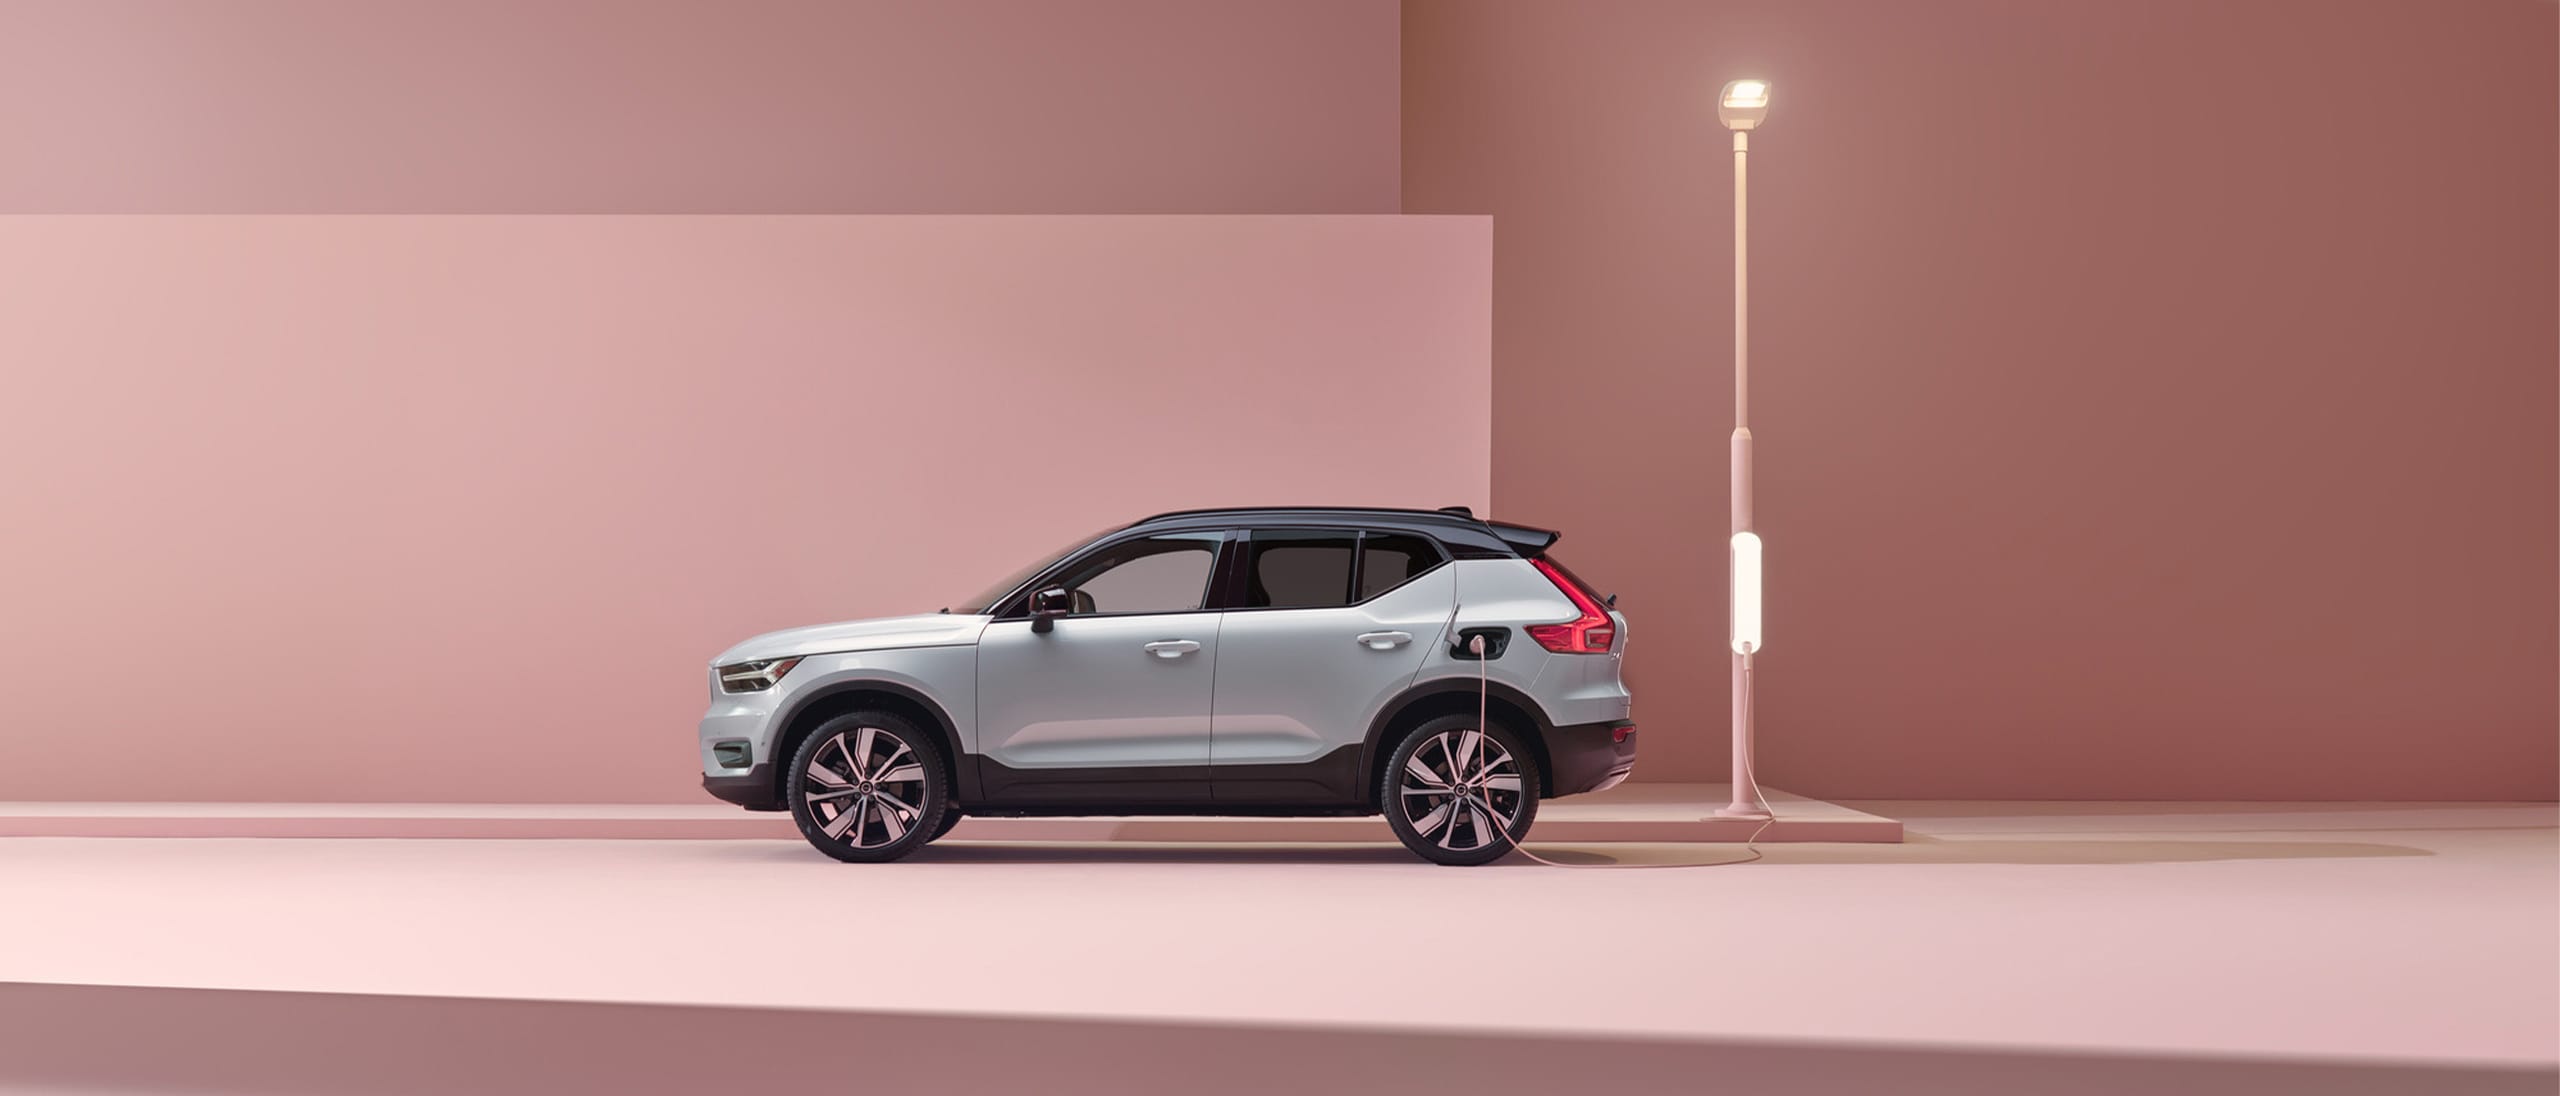 XC40 Recharge electric luxury SUV side view